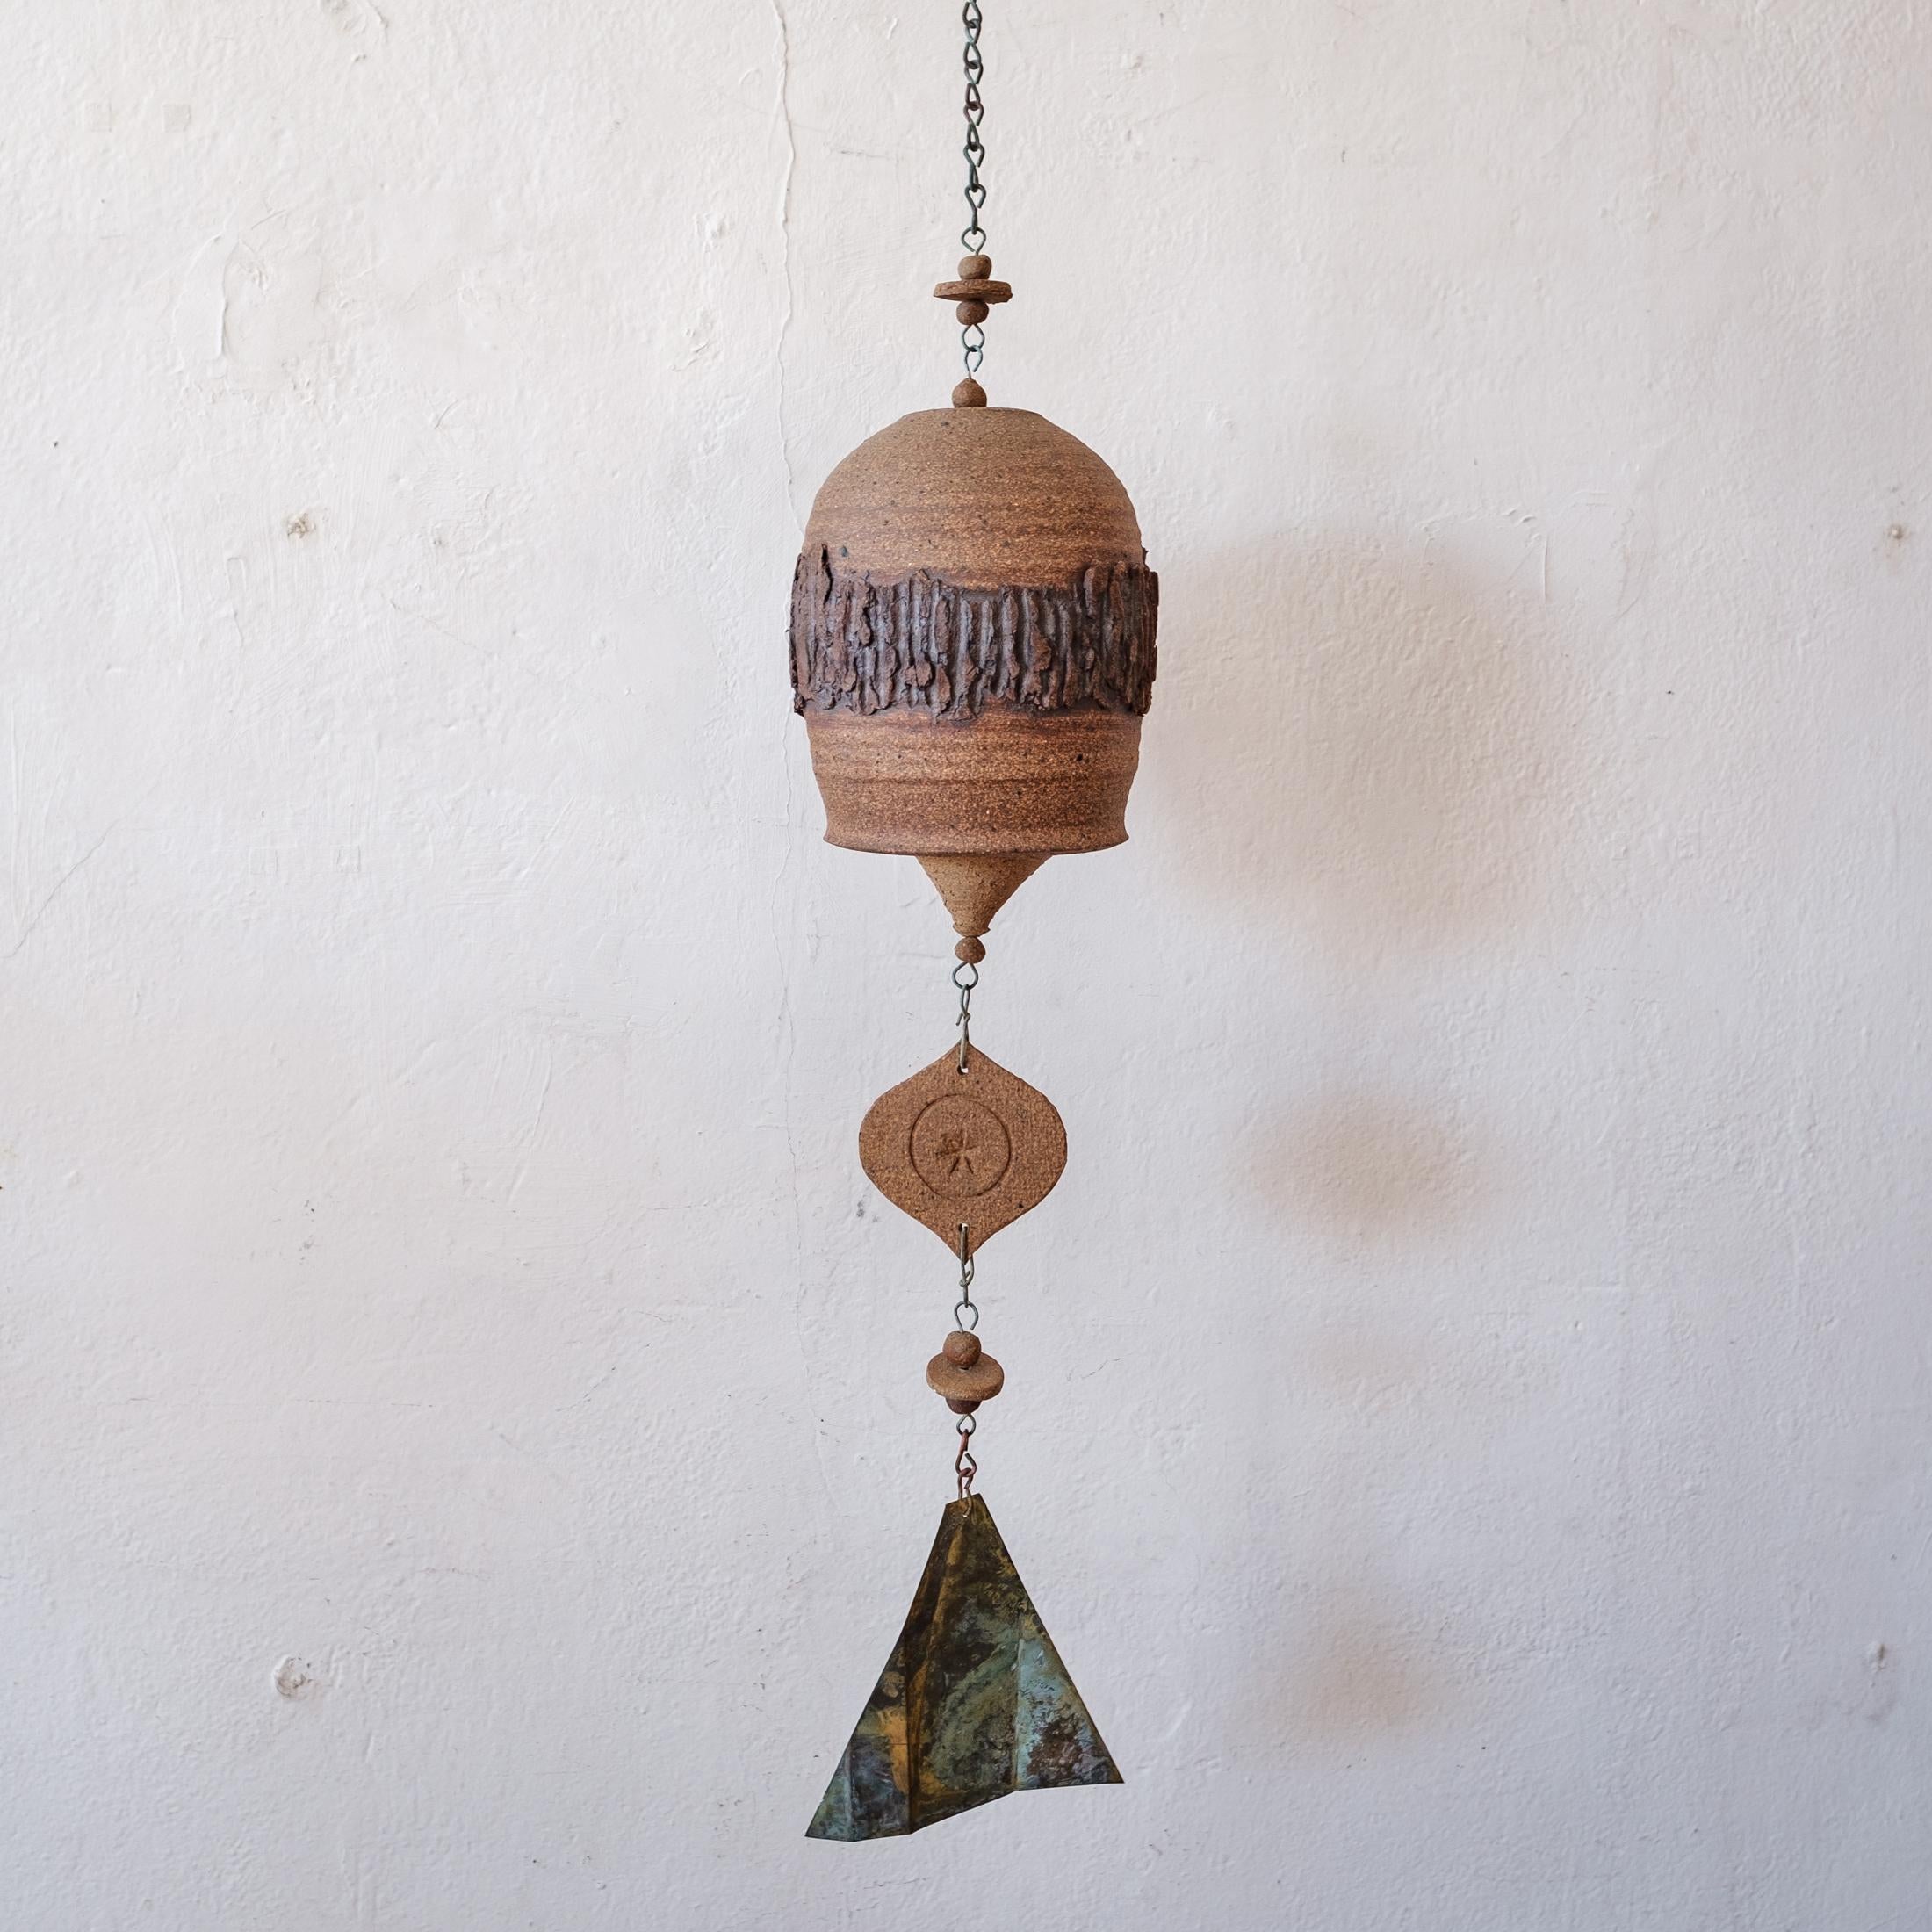 Hanging ceramic bell or chime by California ceramic artist, Roger Bailey. Textured wheel-thrown stoneware body with handbuilt hanging elements. Nice patina on the chain and wind catcher. Incised signature. 

The total height including chain and